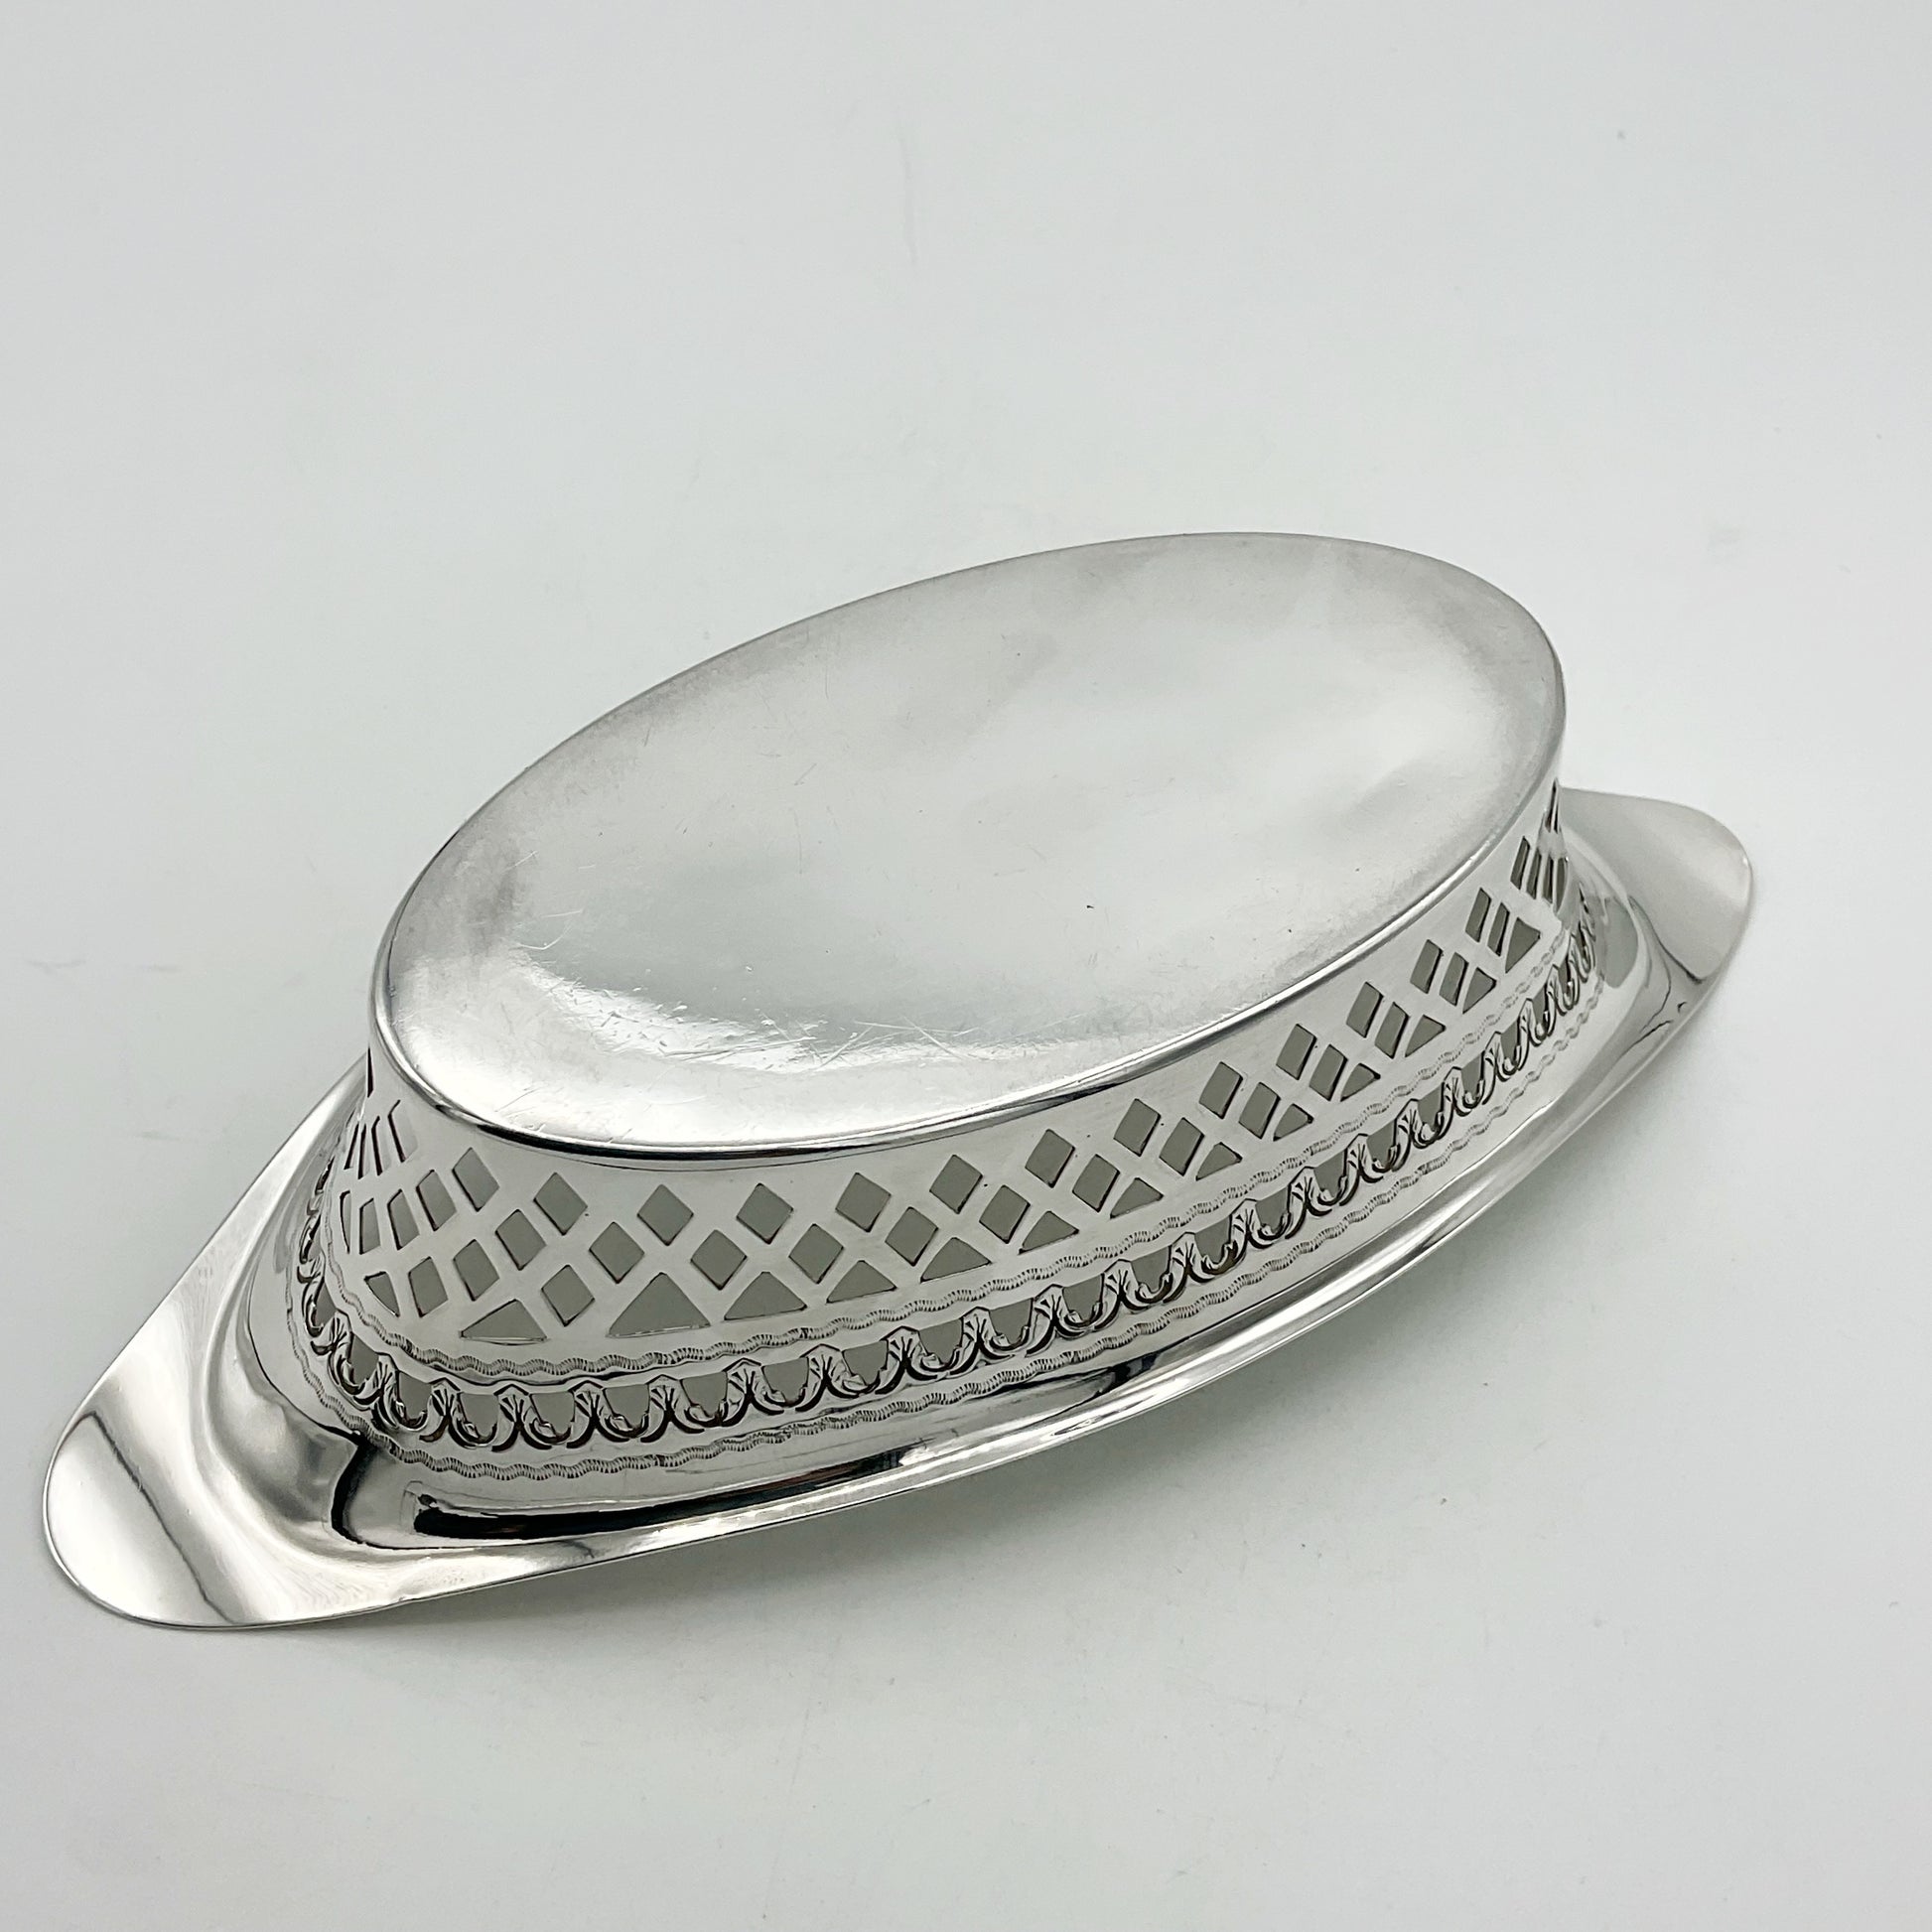 Base of antique Silver pierced bowl upside down on white background 